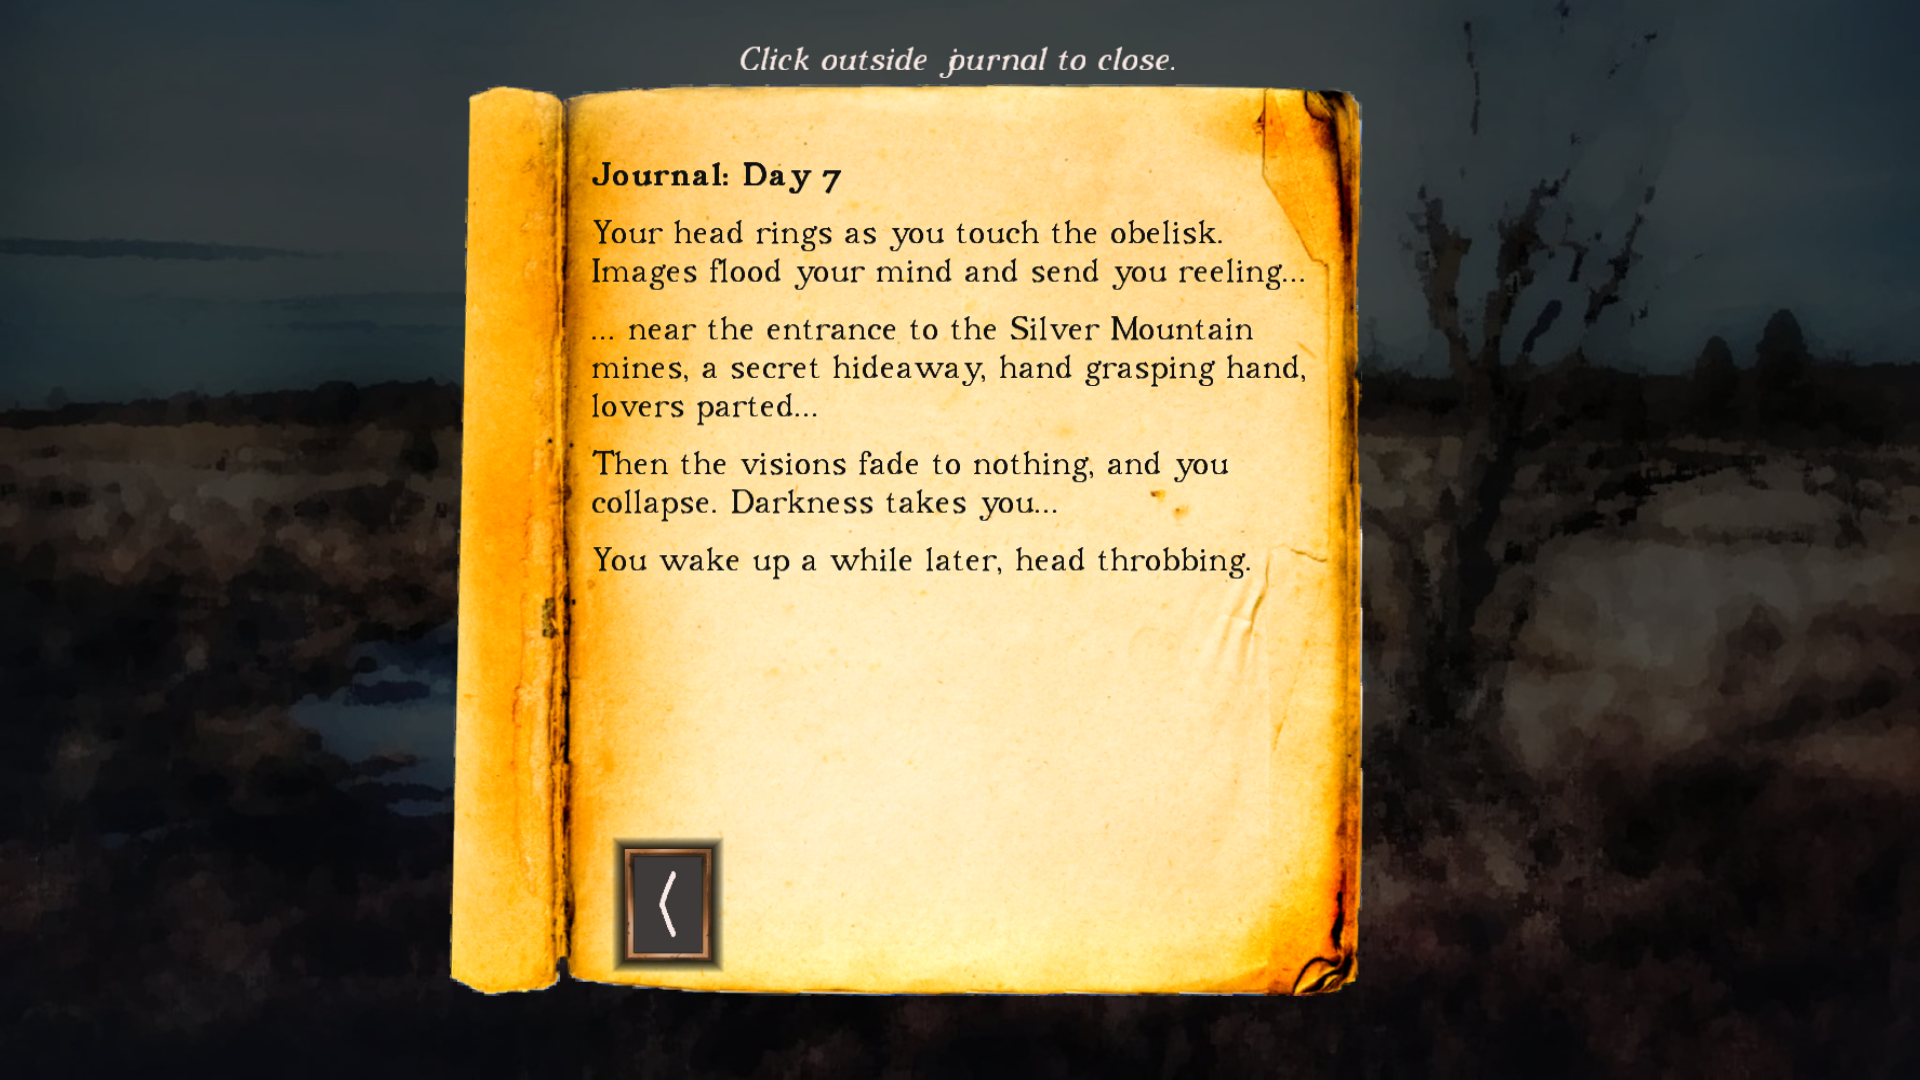 Screenshot of the new journal graphic: The journal entry shows the player seeing a vision after touching the obelisk